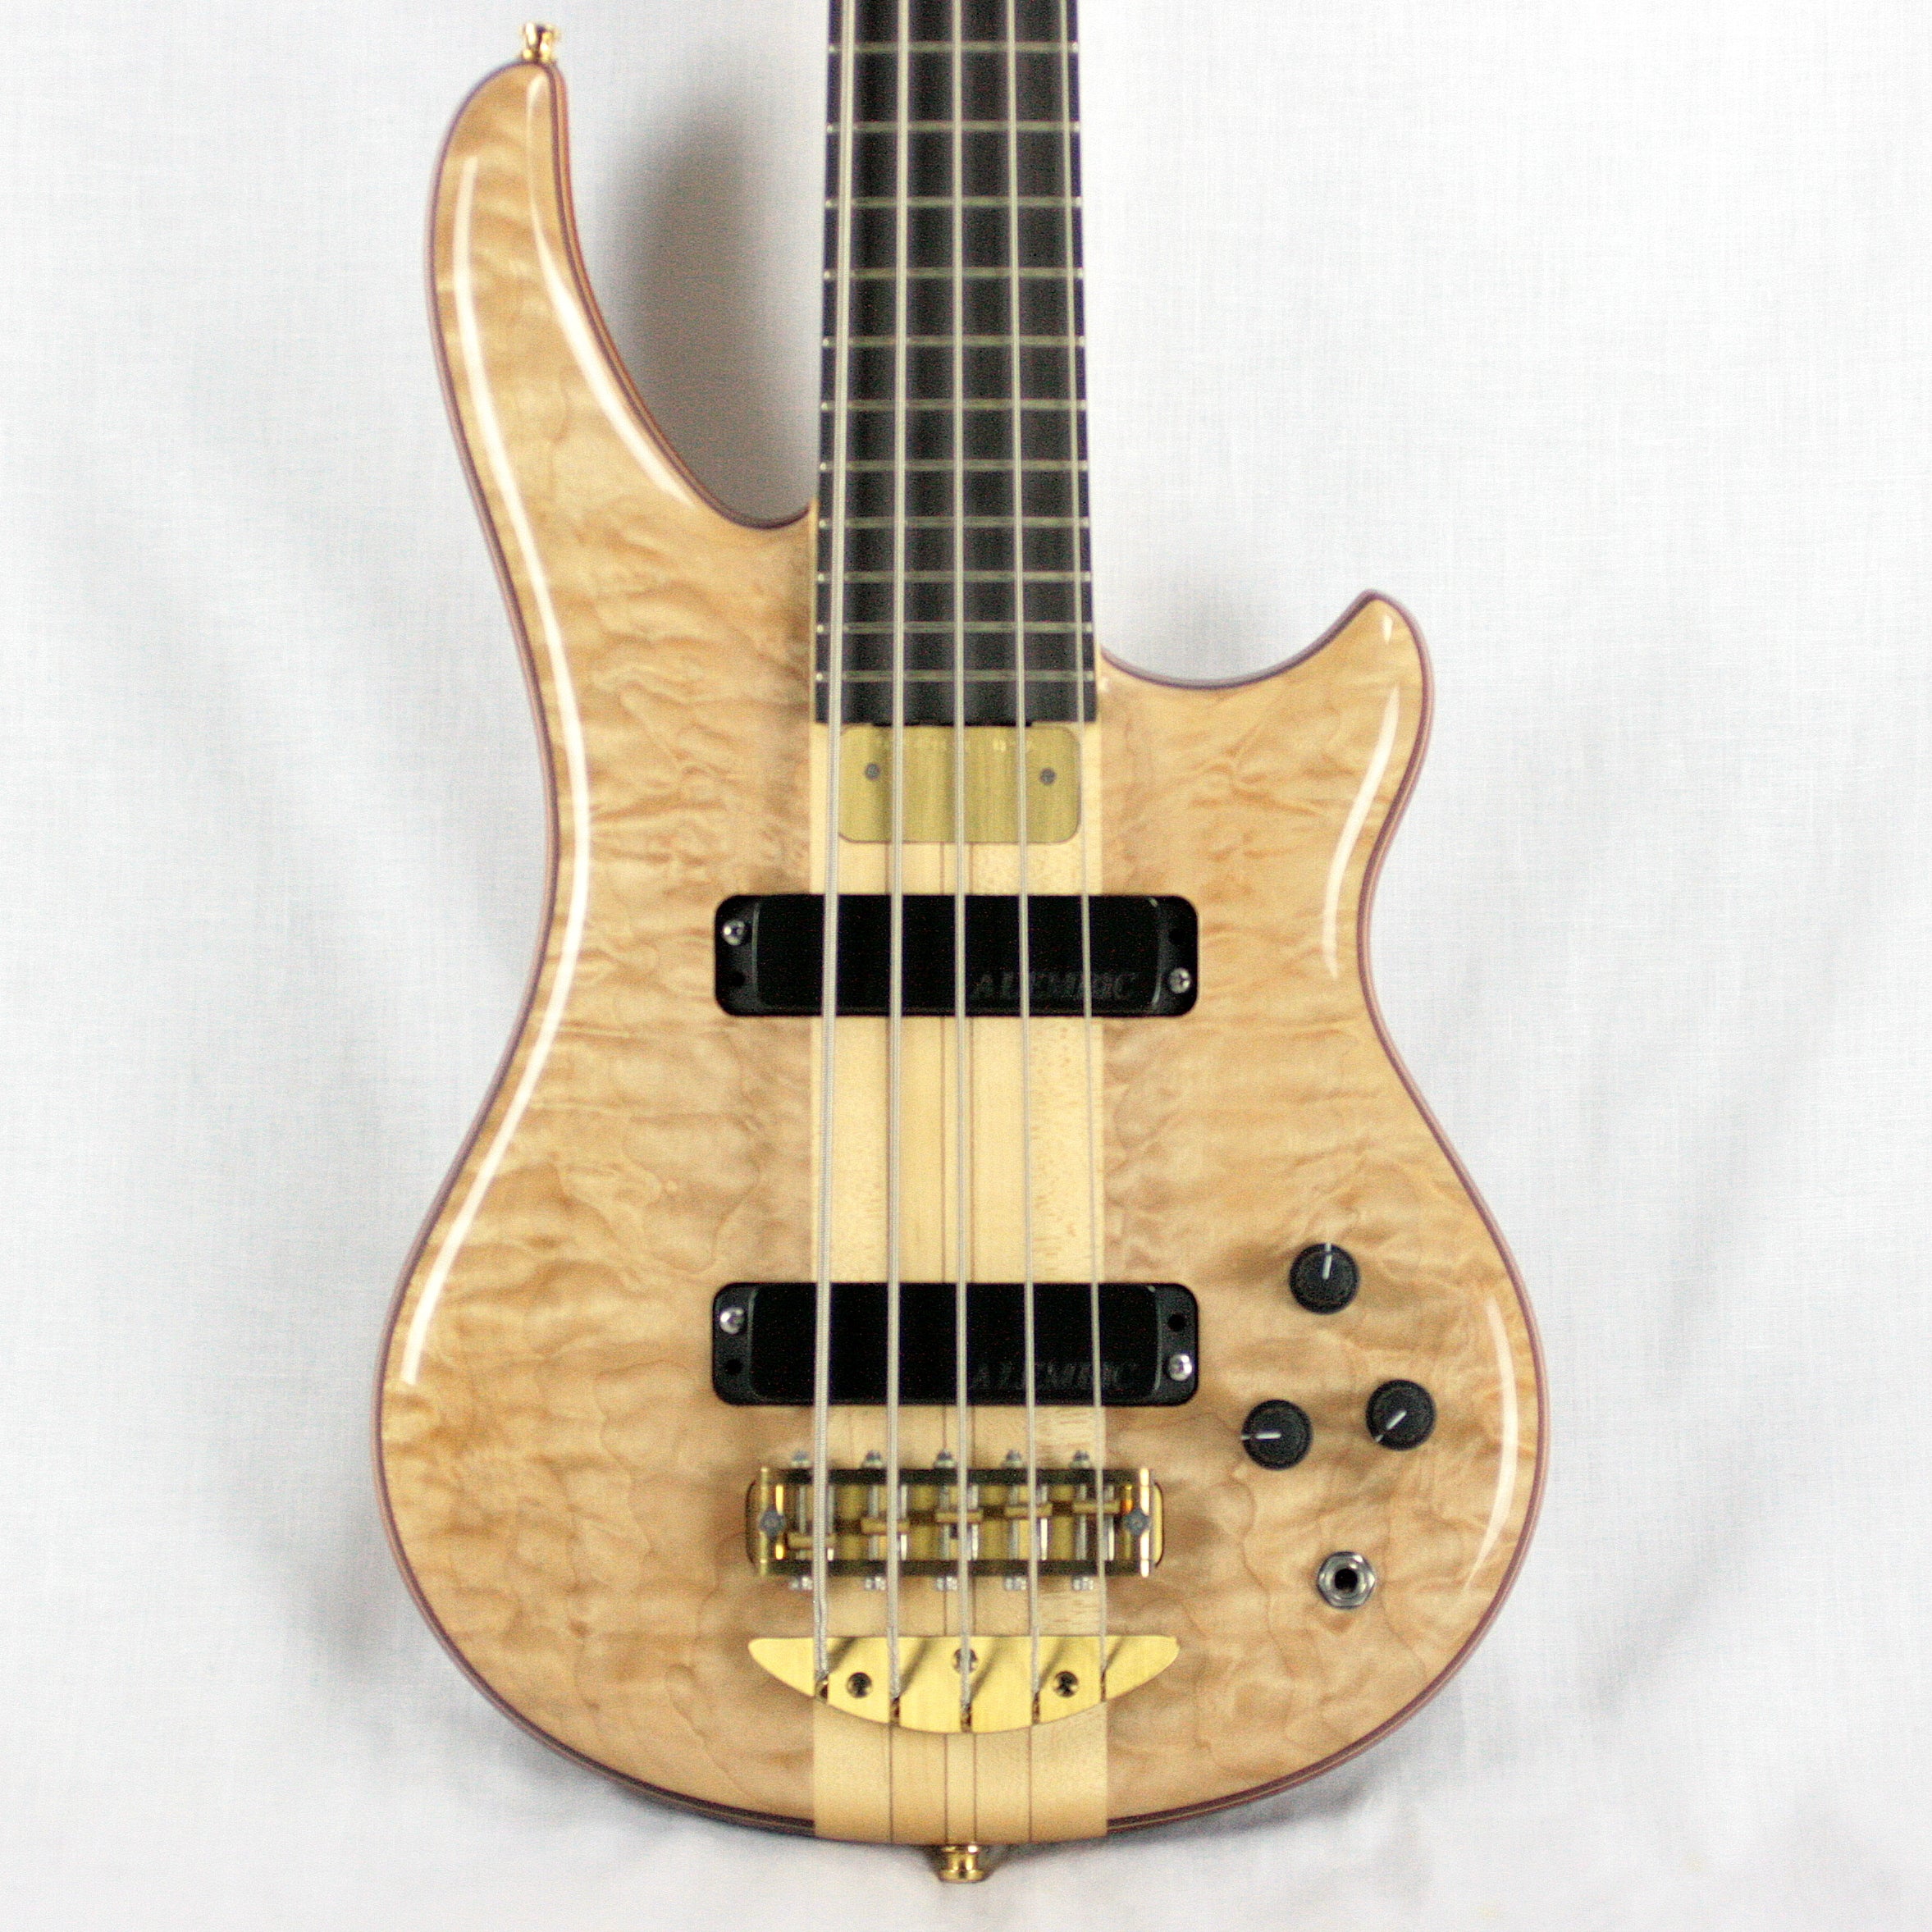 *SOLD*  MINT 2003 Alembic Essence 5-String Bass Guitar! Beautiful Quilted Maple! europa